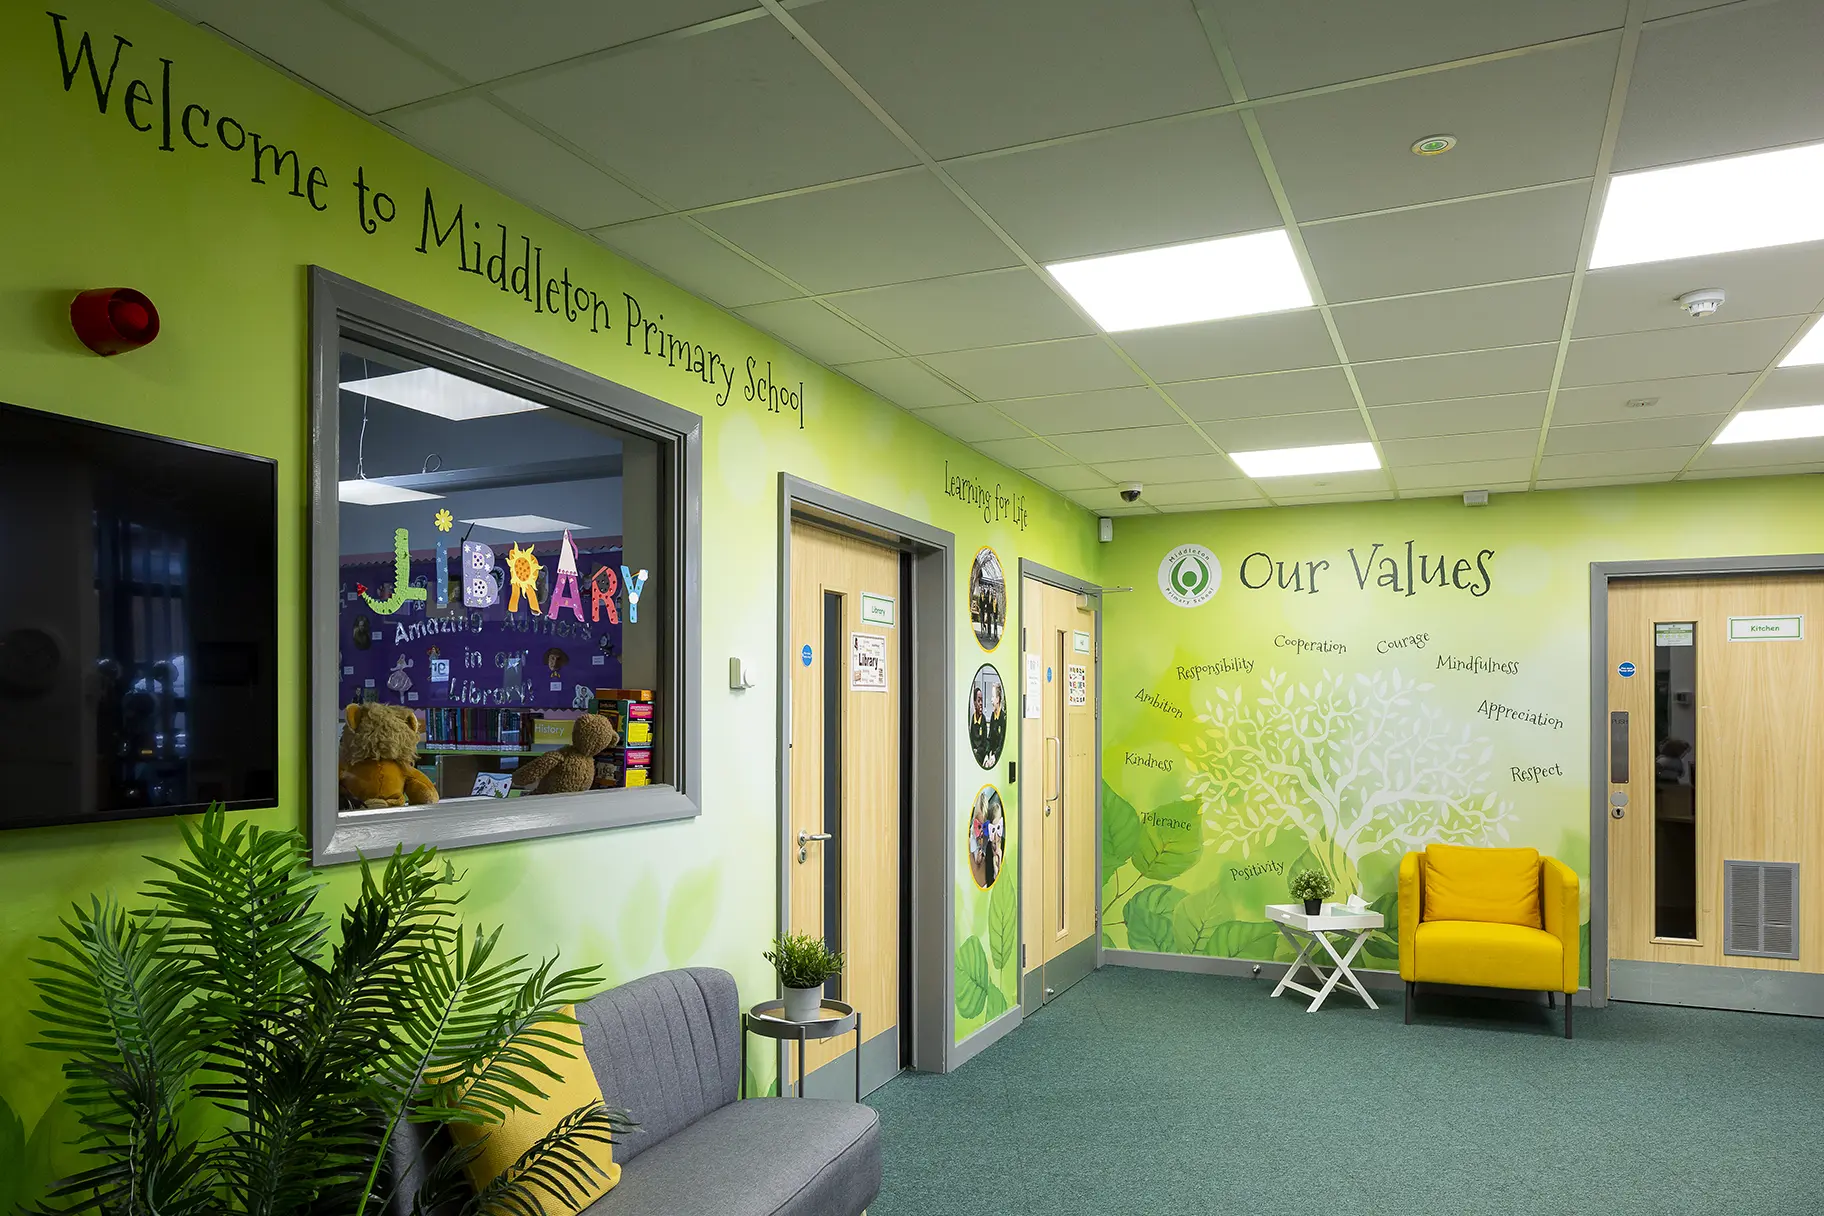 Middleton Primary School Values Wall Art